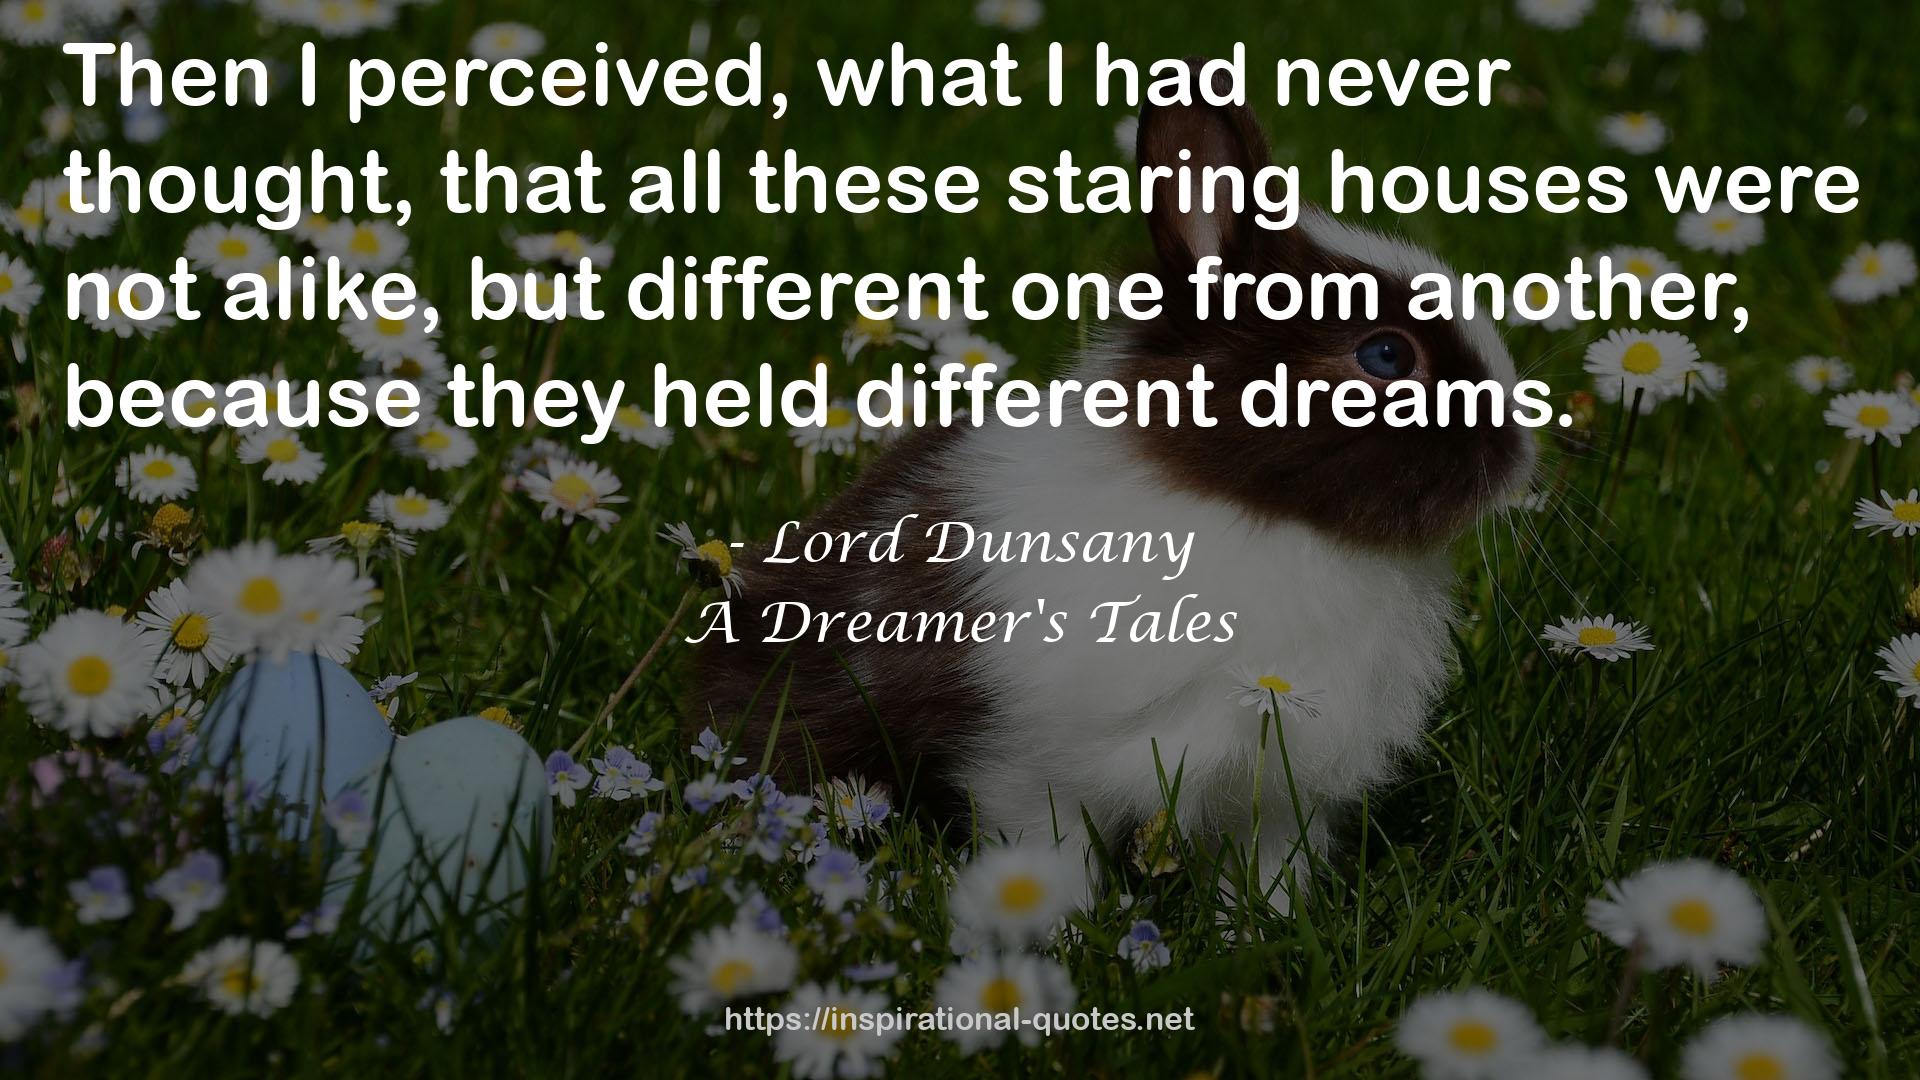 A Dreamer's Tales QUOTES